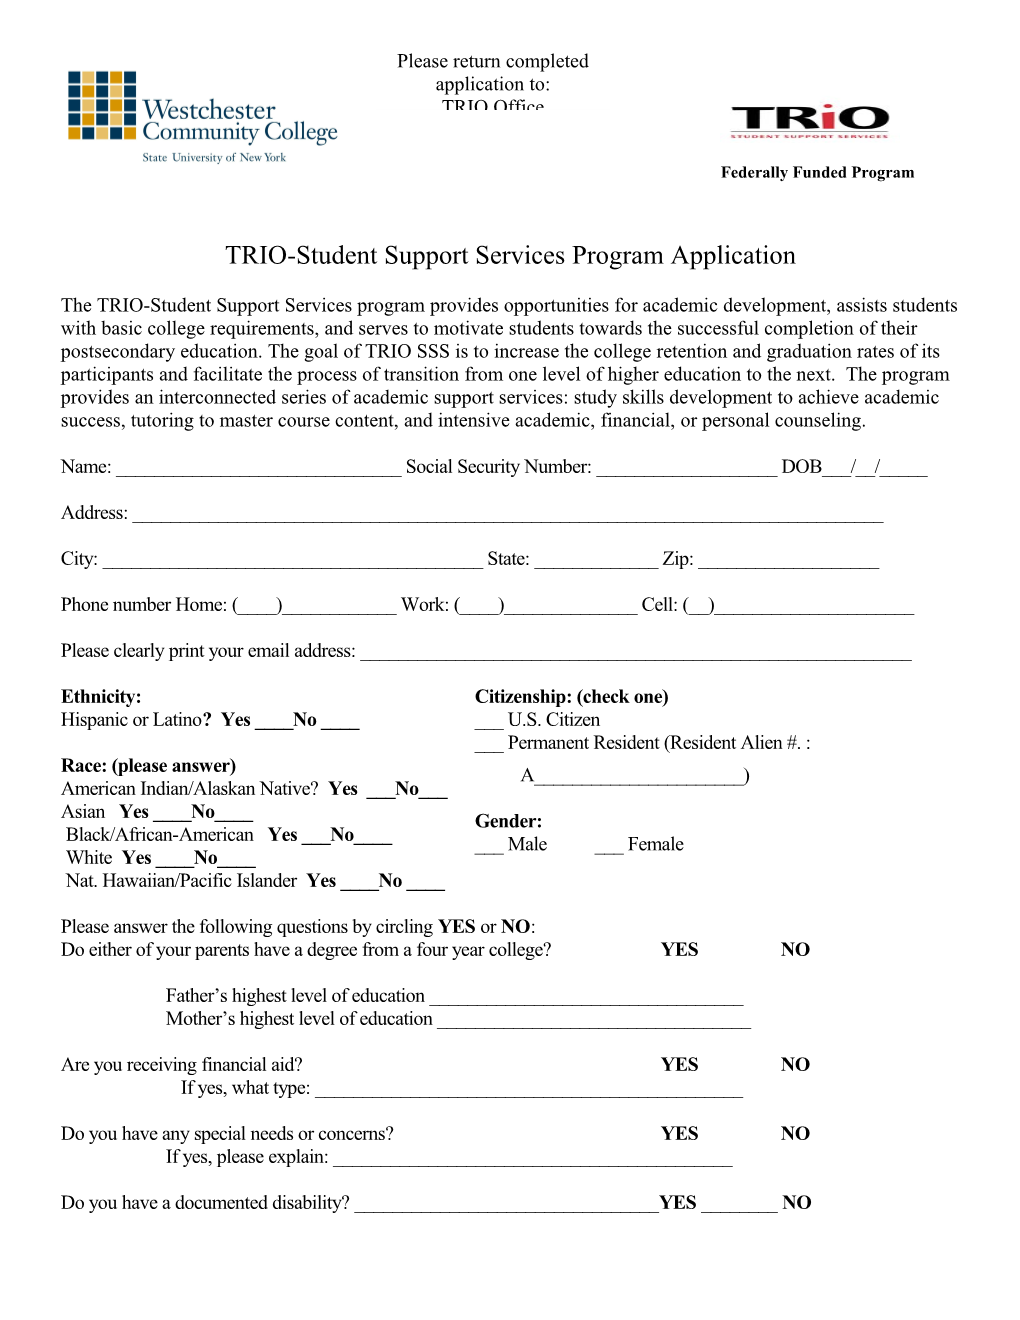 TRIO-Student Support Services Program Application